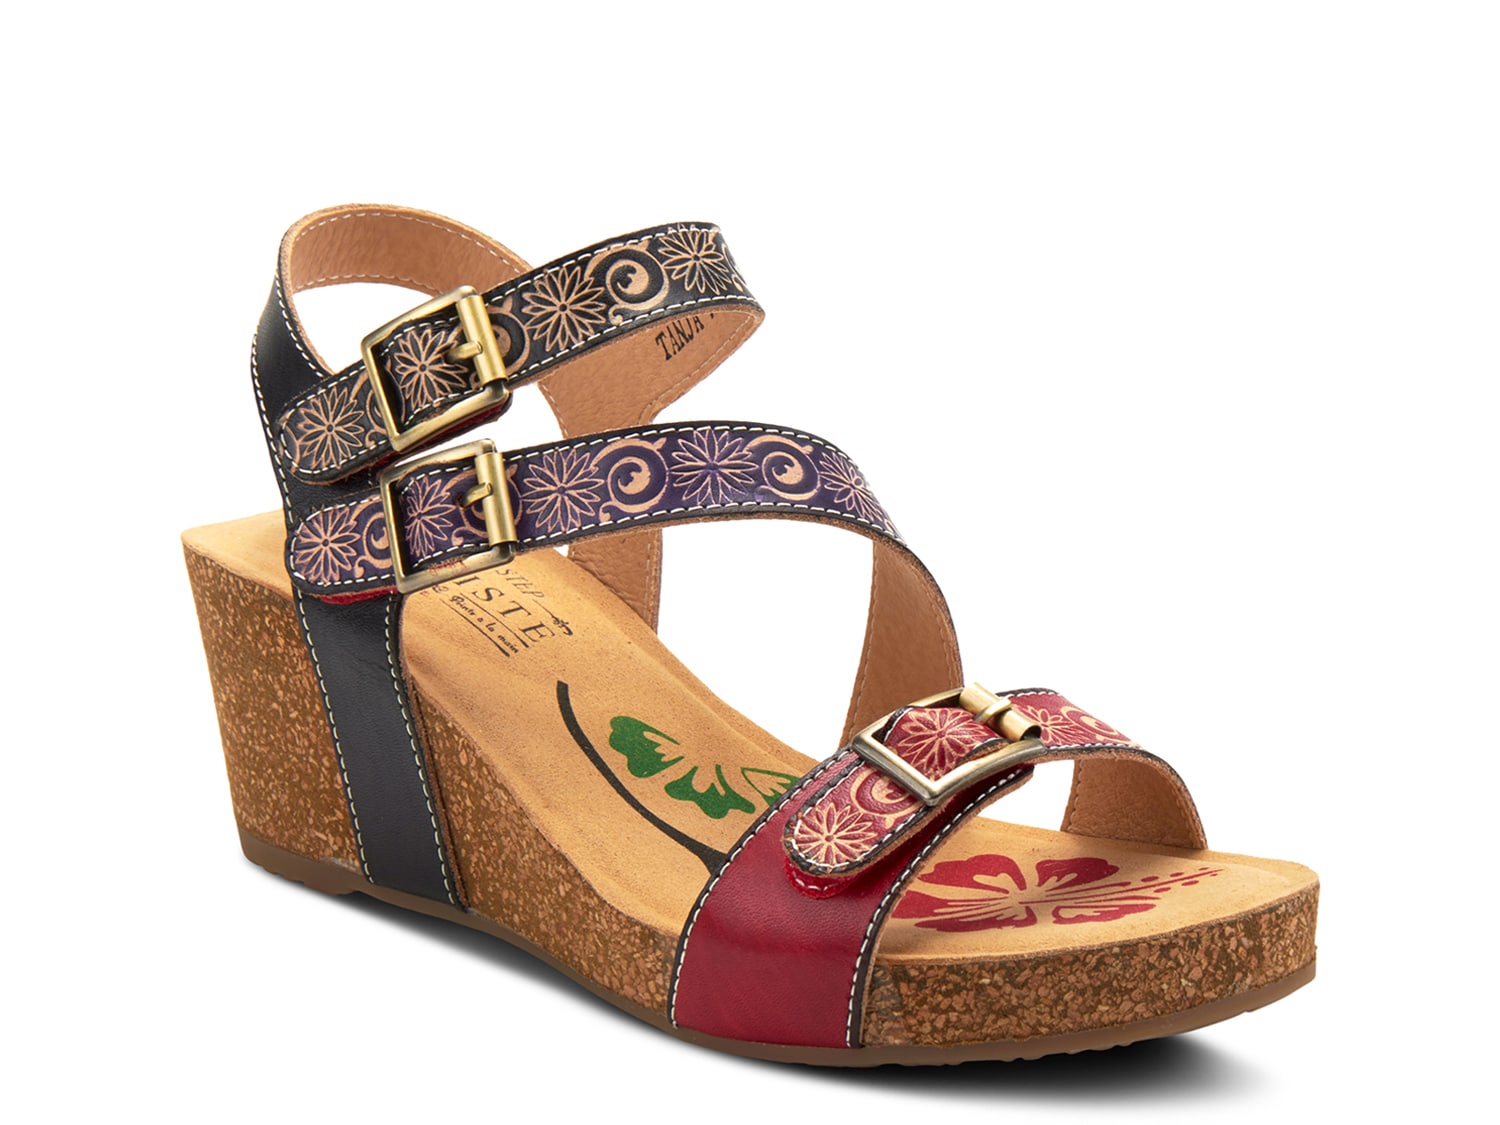 L'Artiste by Spring Step Tanja Wedge Sandal - Free Shipping | DSW